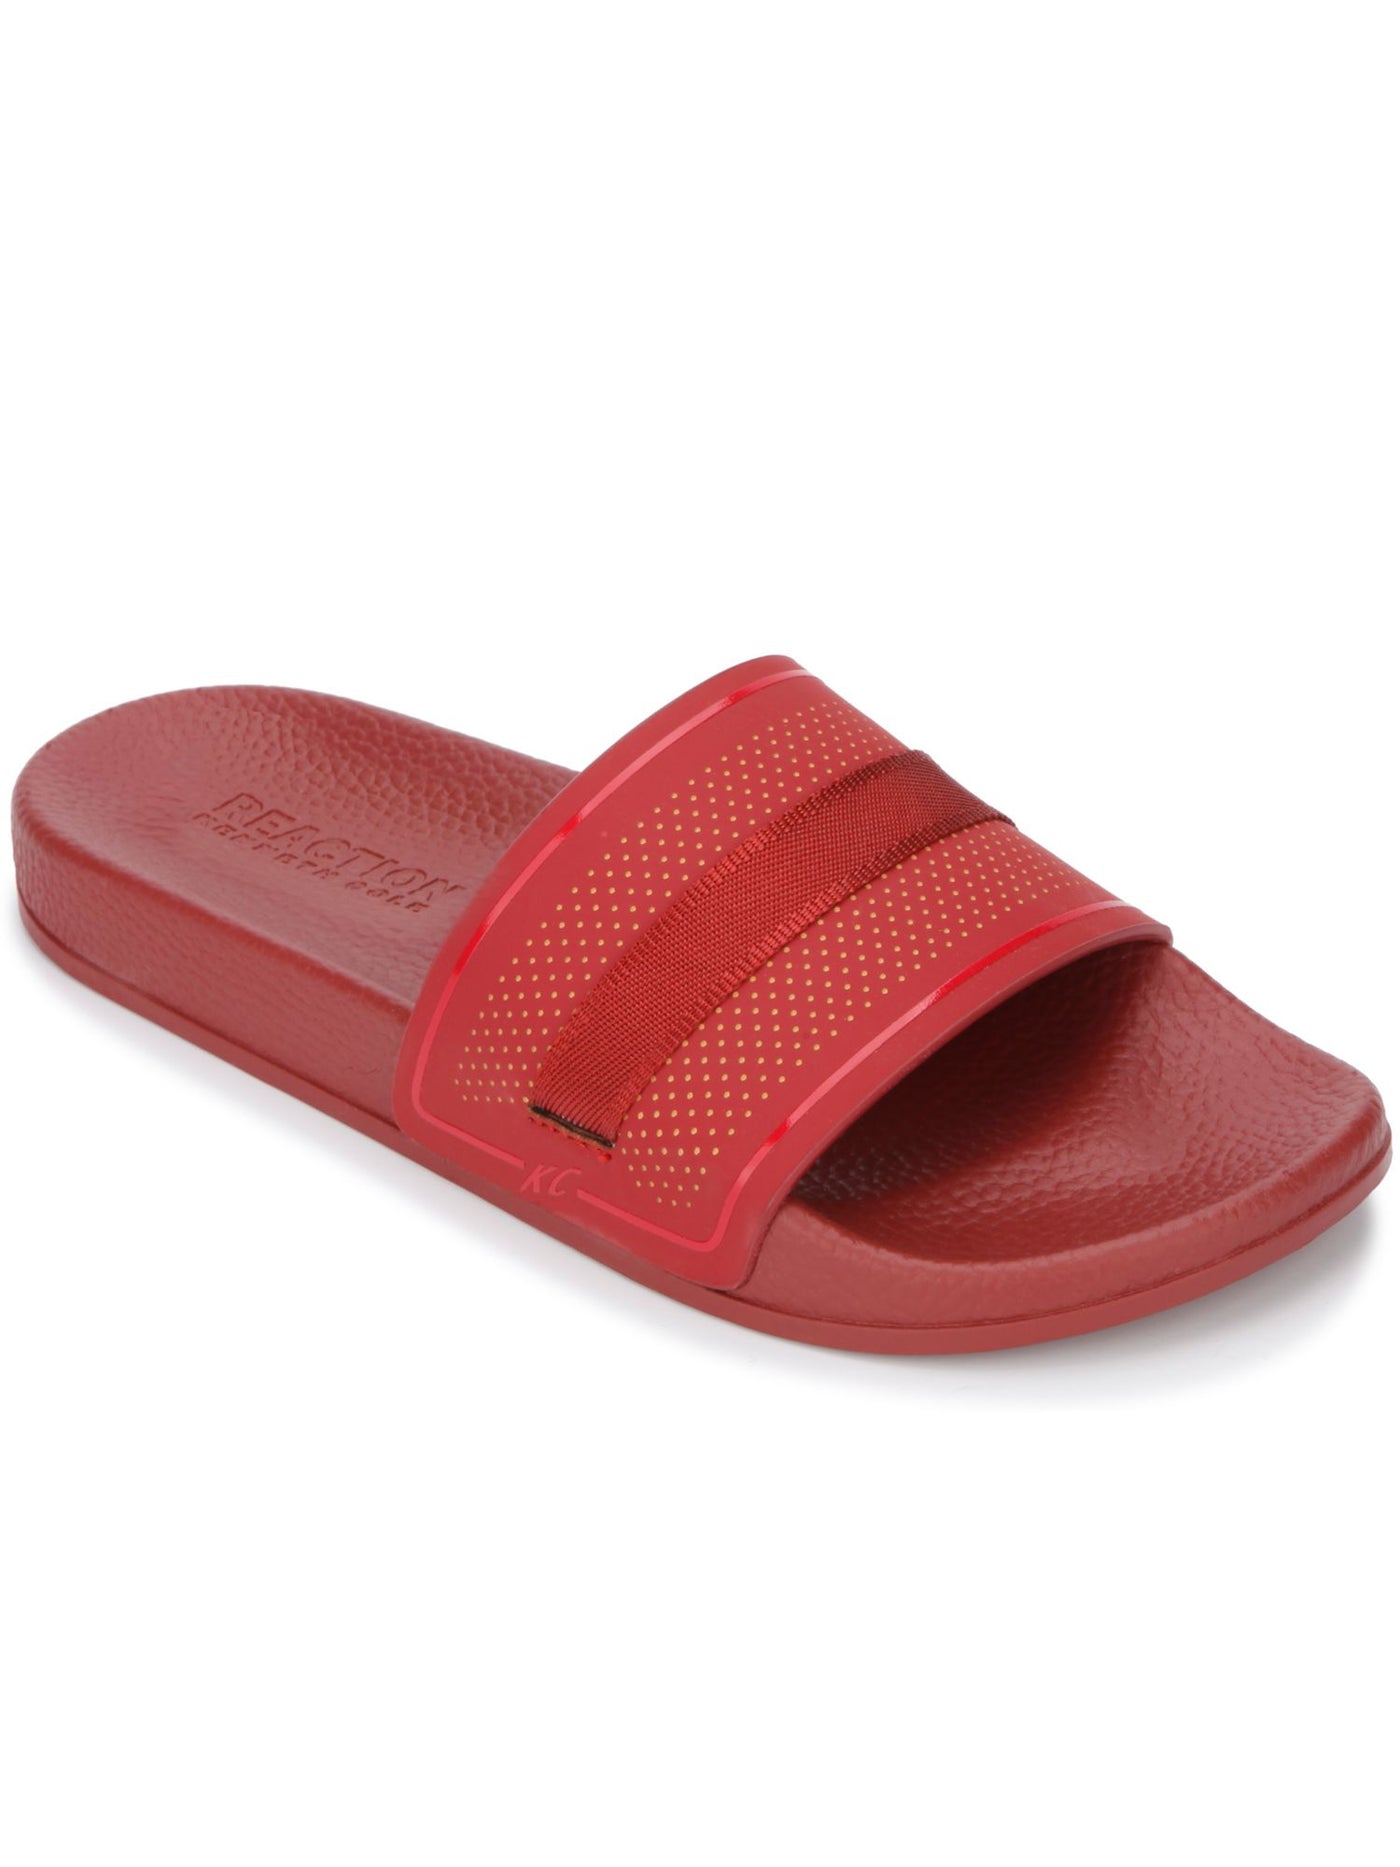 REACTION KENNETH COLE Mens Red Mixed Media Contoured Footbed Perforated Screen Open Toe Slip On Slide Sandals Shoes 9 M